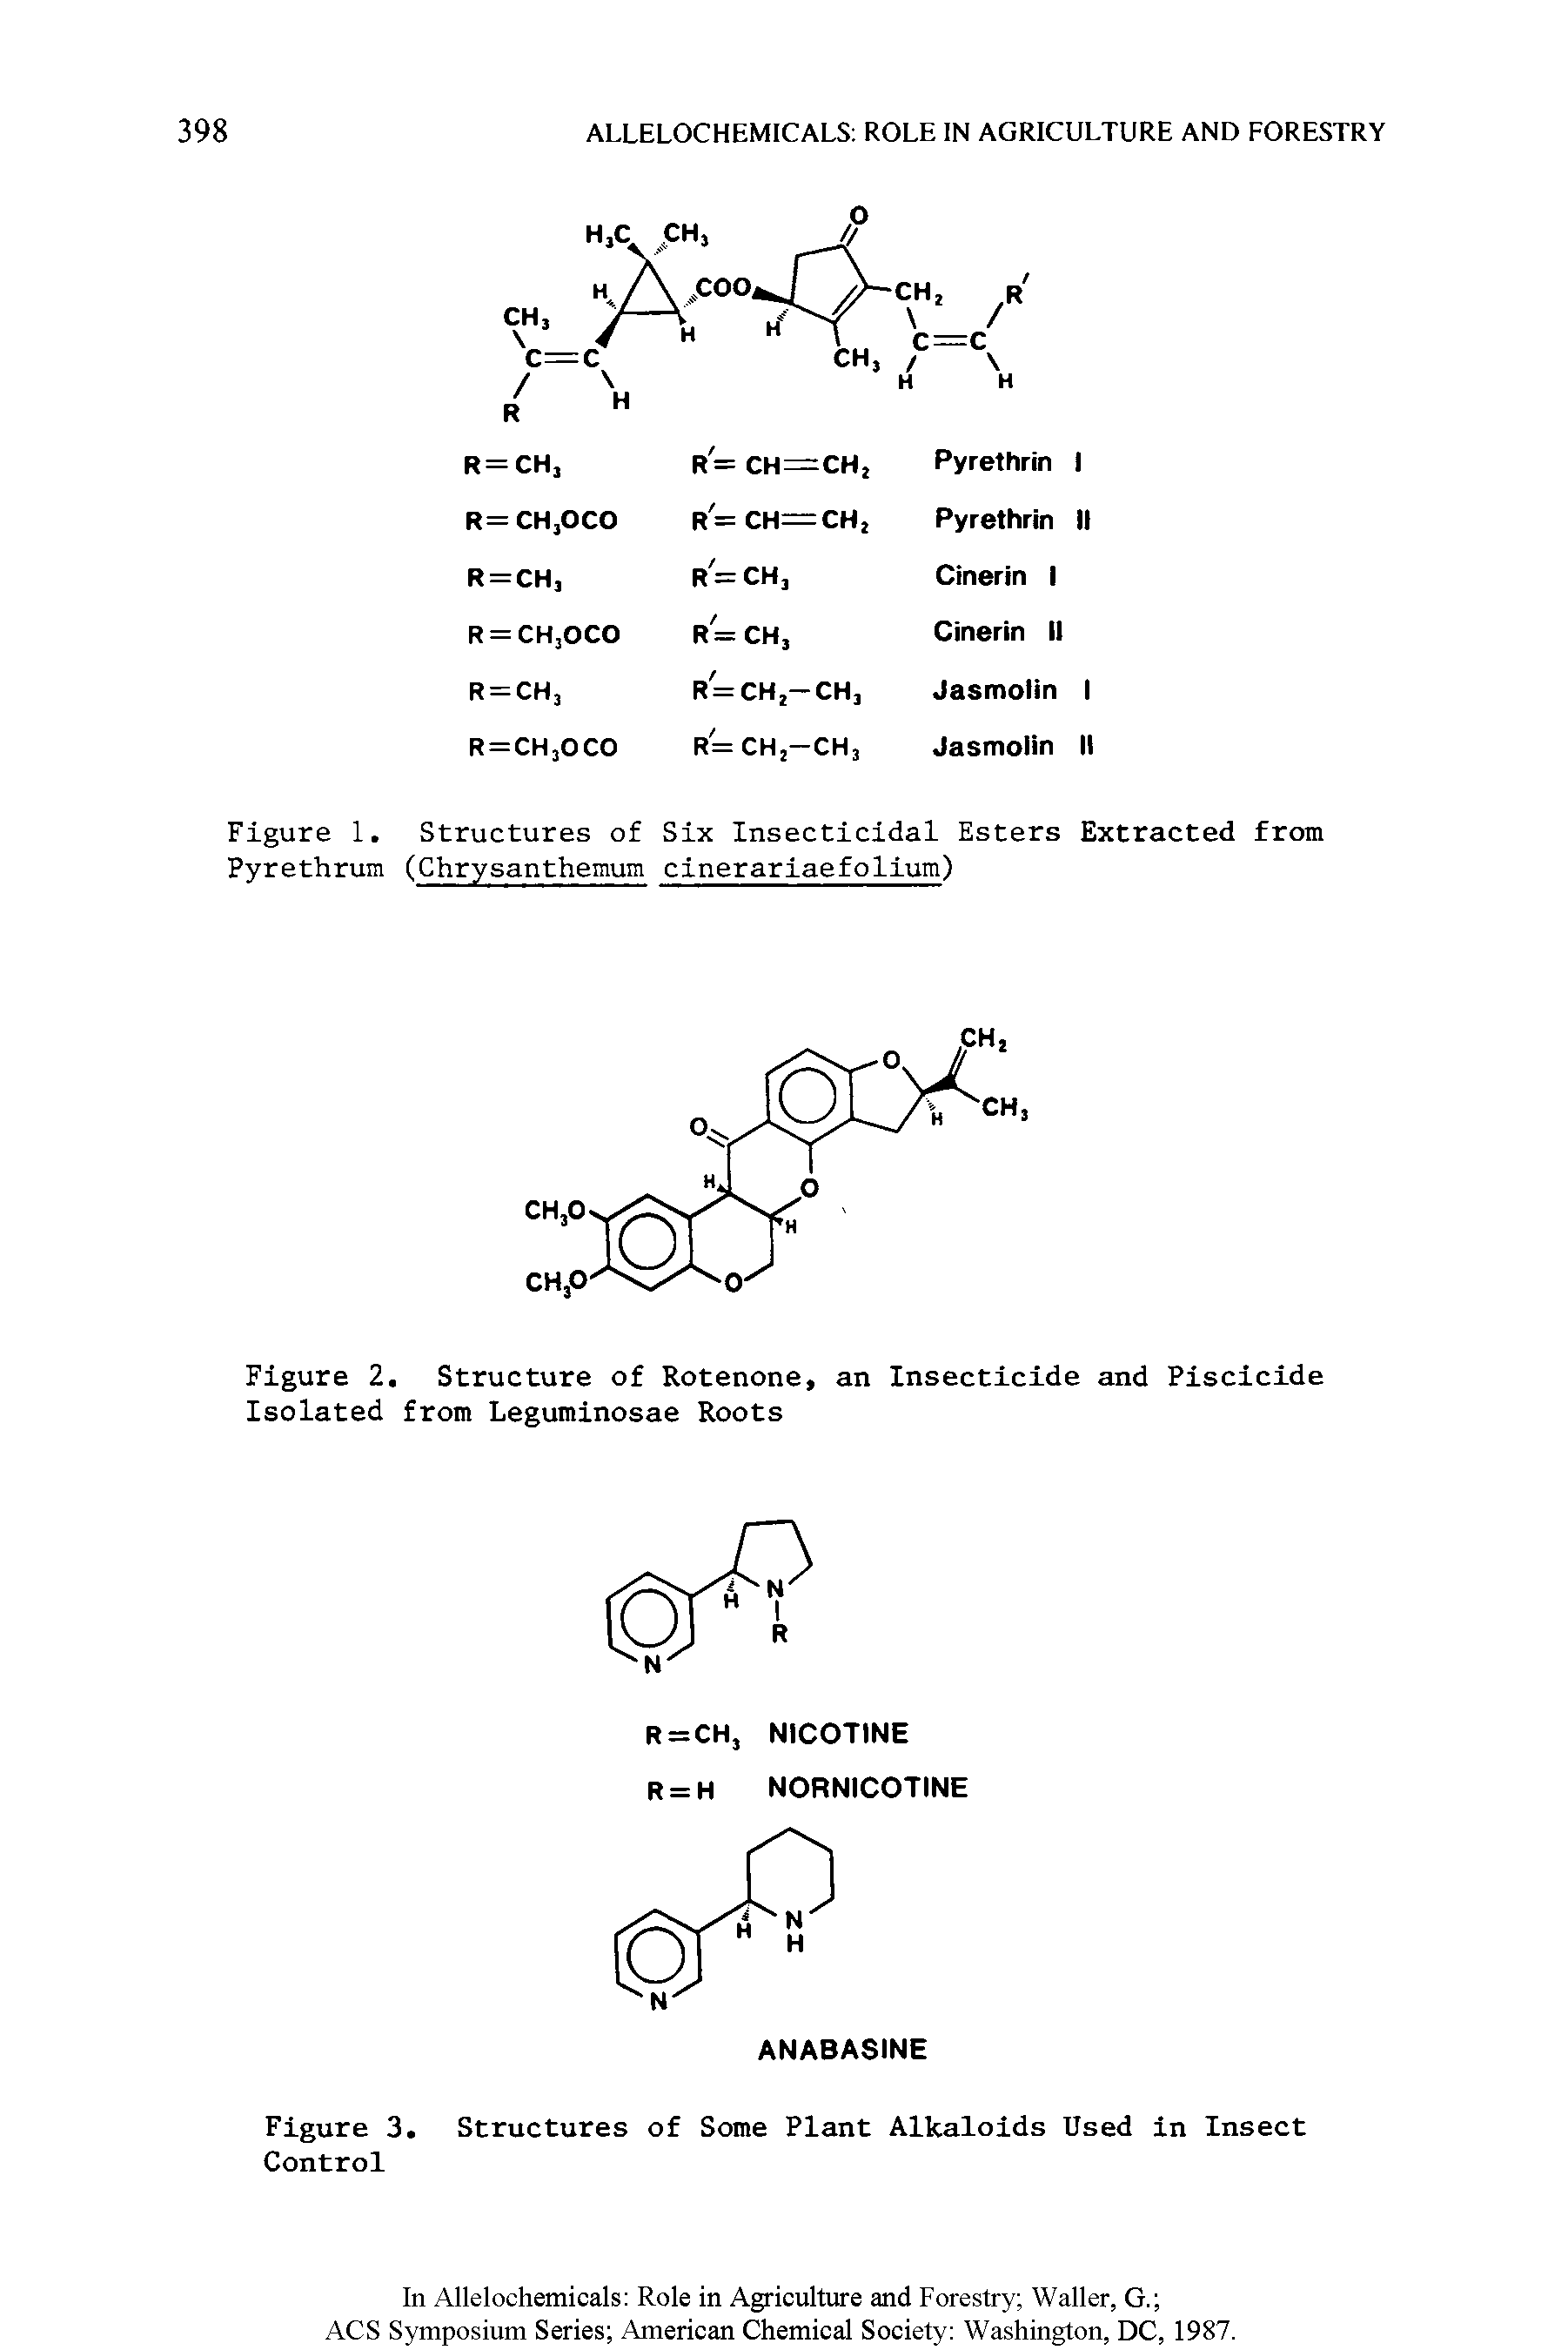 Figure 3. Structures of Some Plant Alkaloids Used in Insect Control...